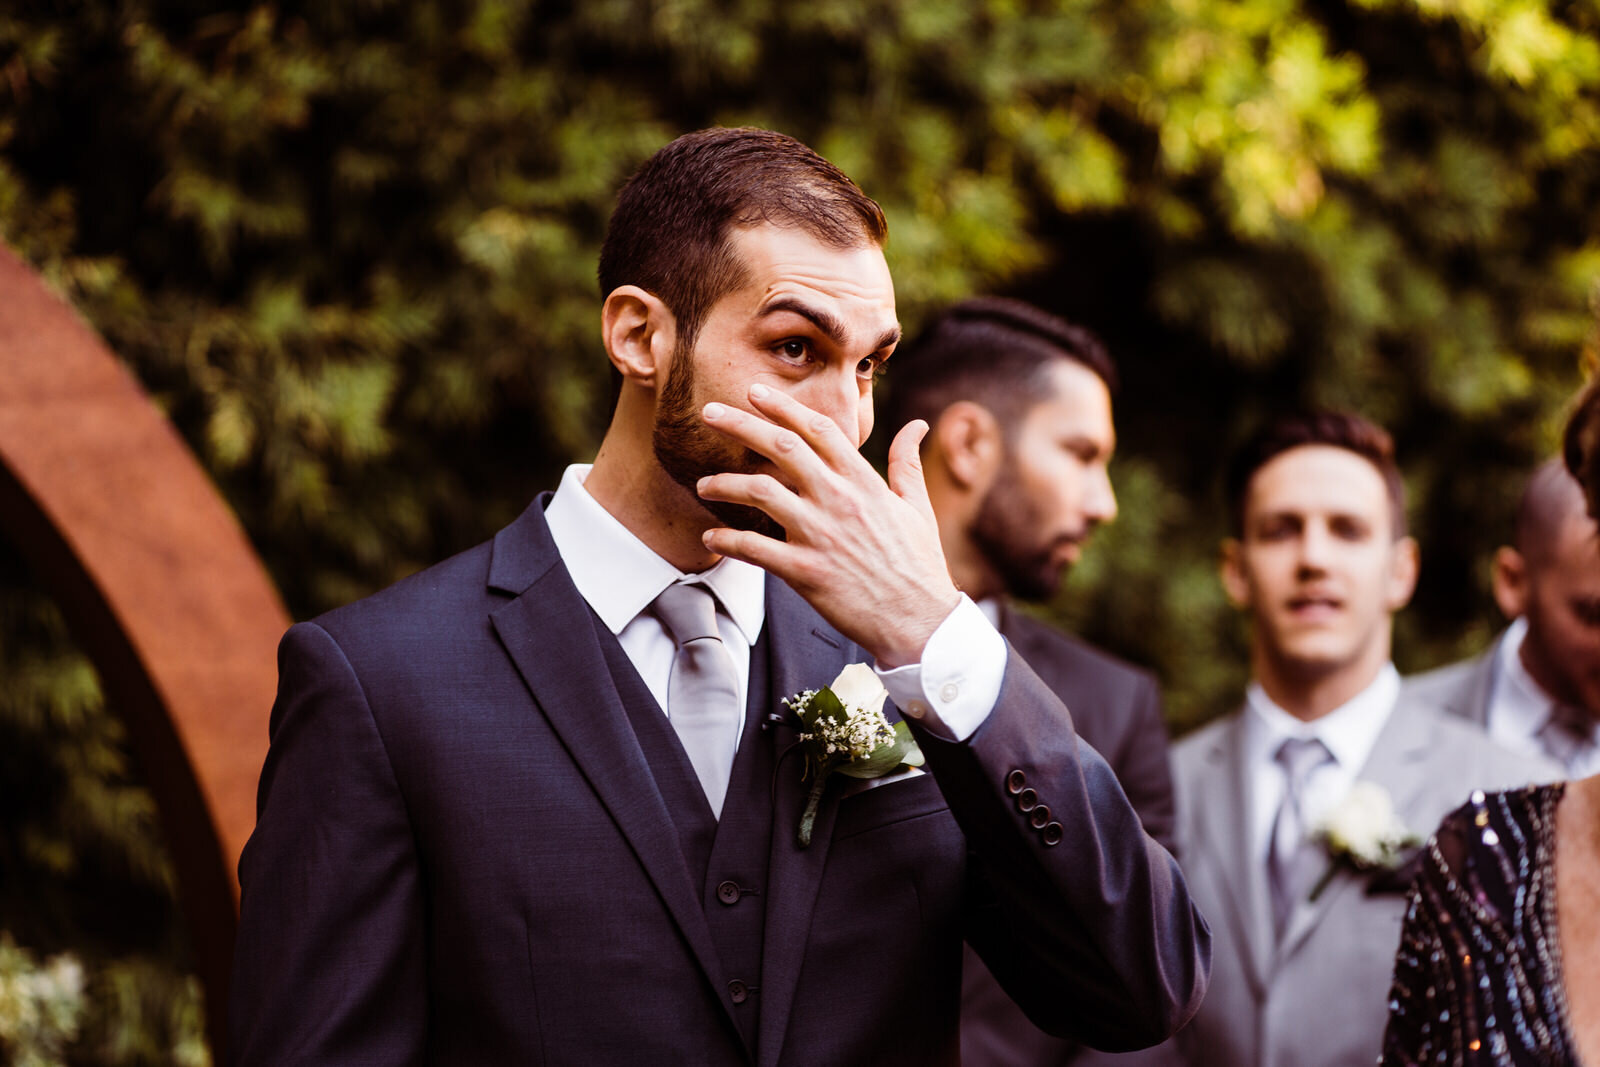 Groom's Reaction Crying | Candid, warm wedding photography | Franciscan Gardens wedding in San Juan Capistrano, CA by Kept Record www.keptrecord.com